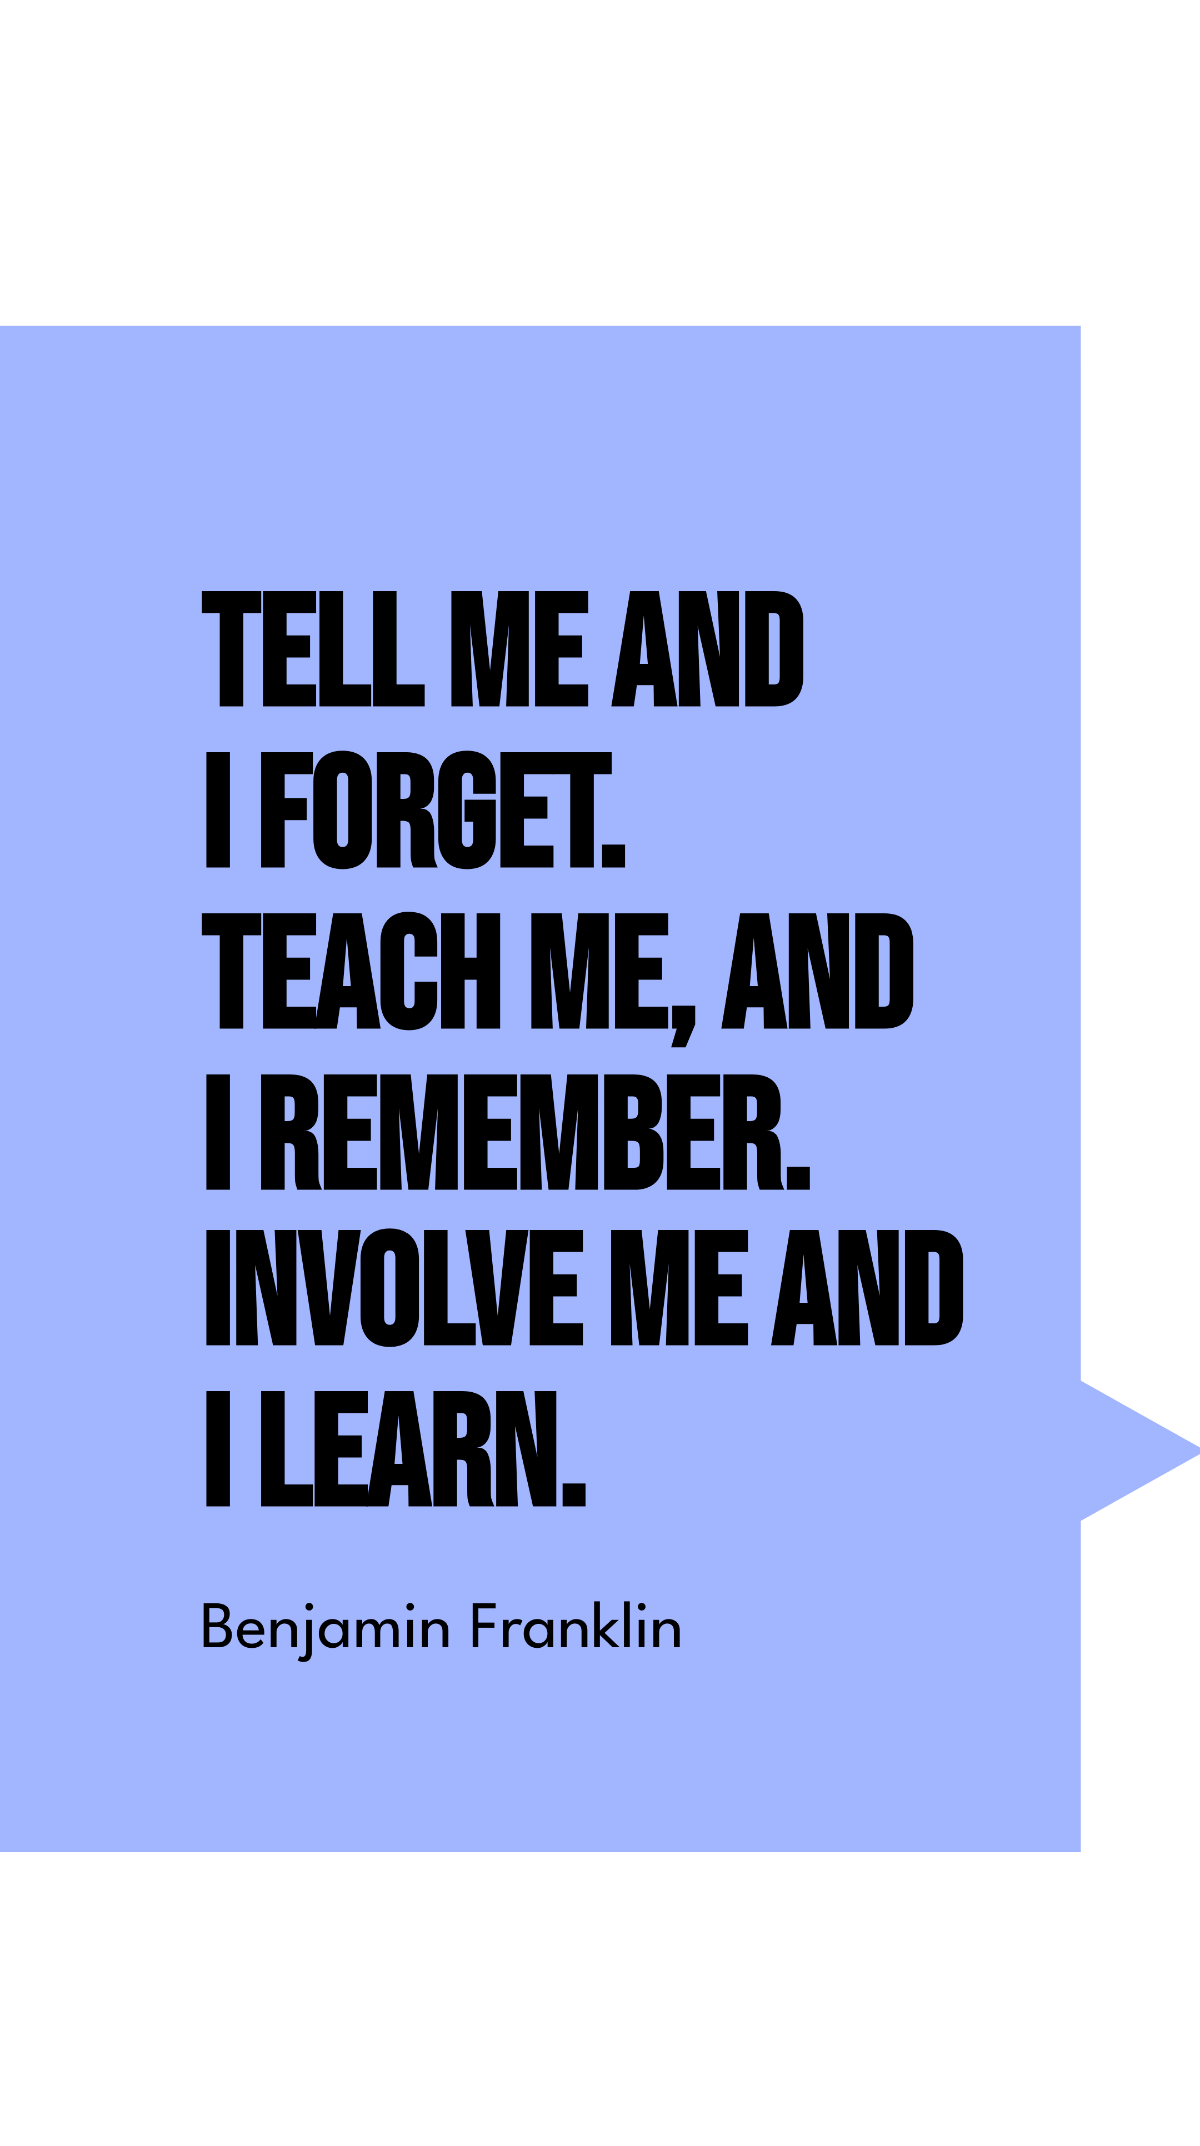 Benjamin Franklin - Tell me and I forget. Teach me, and I remember. Involve me and I learn. Template